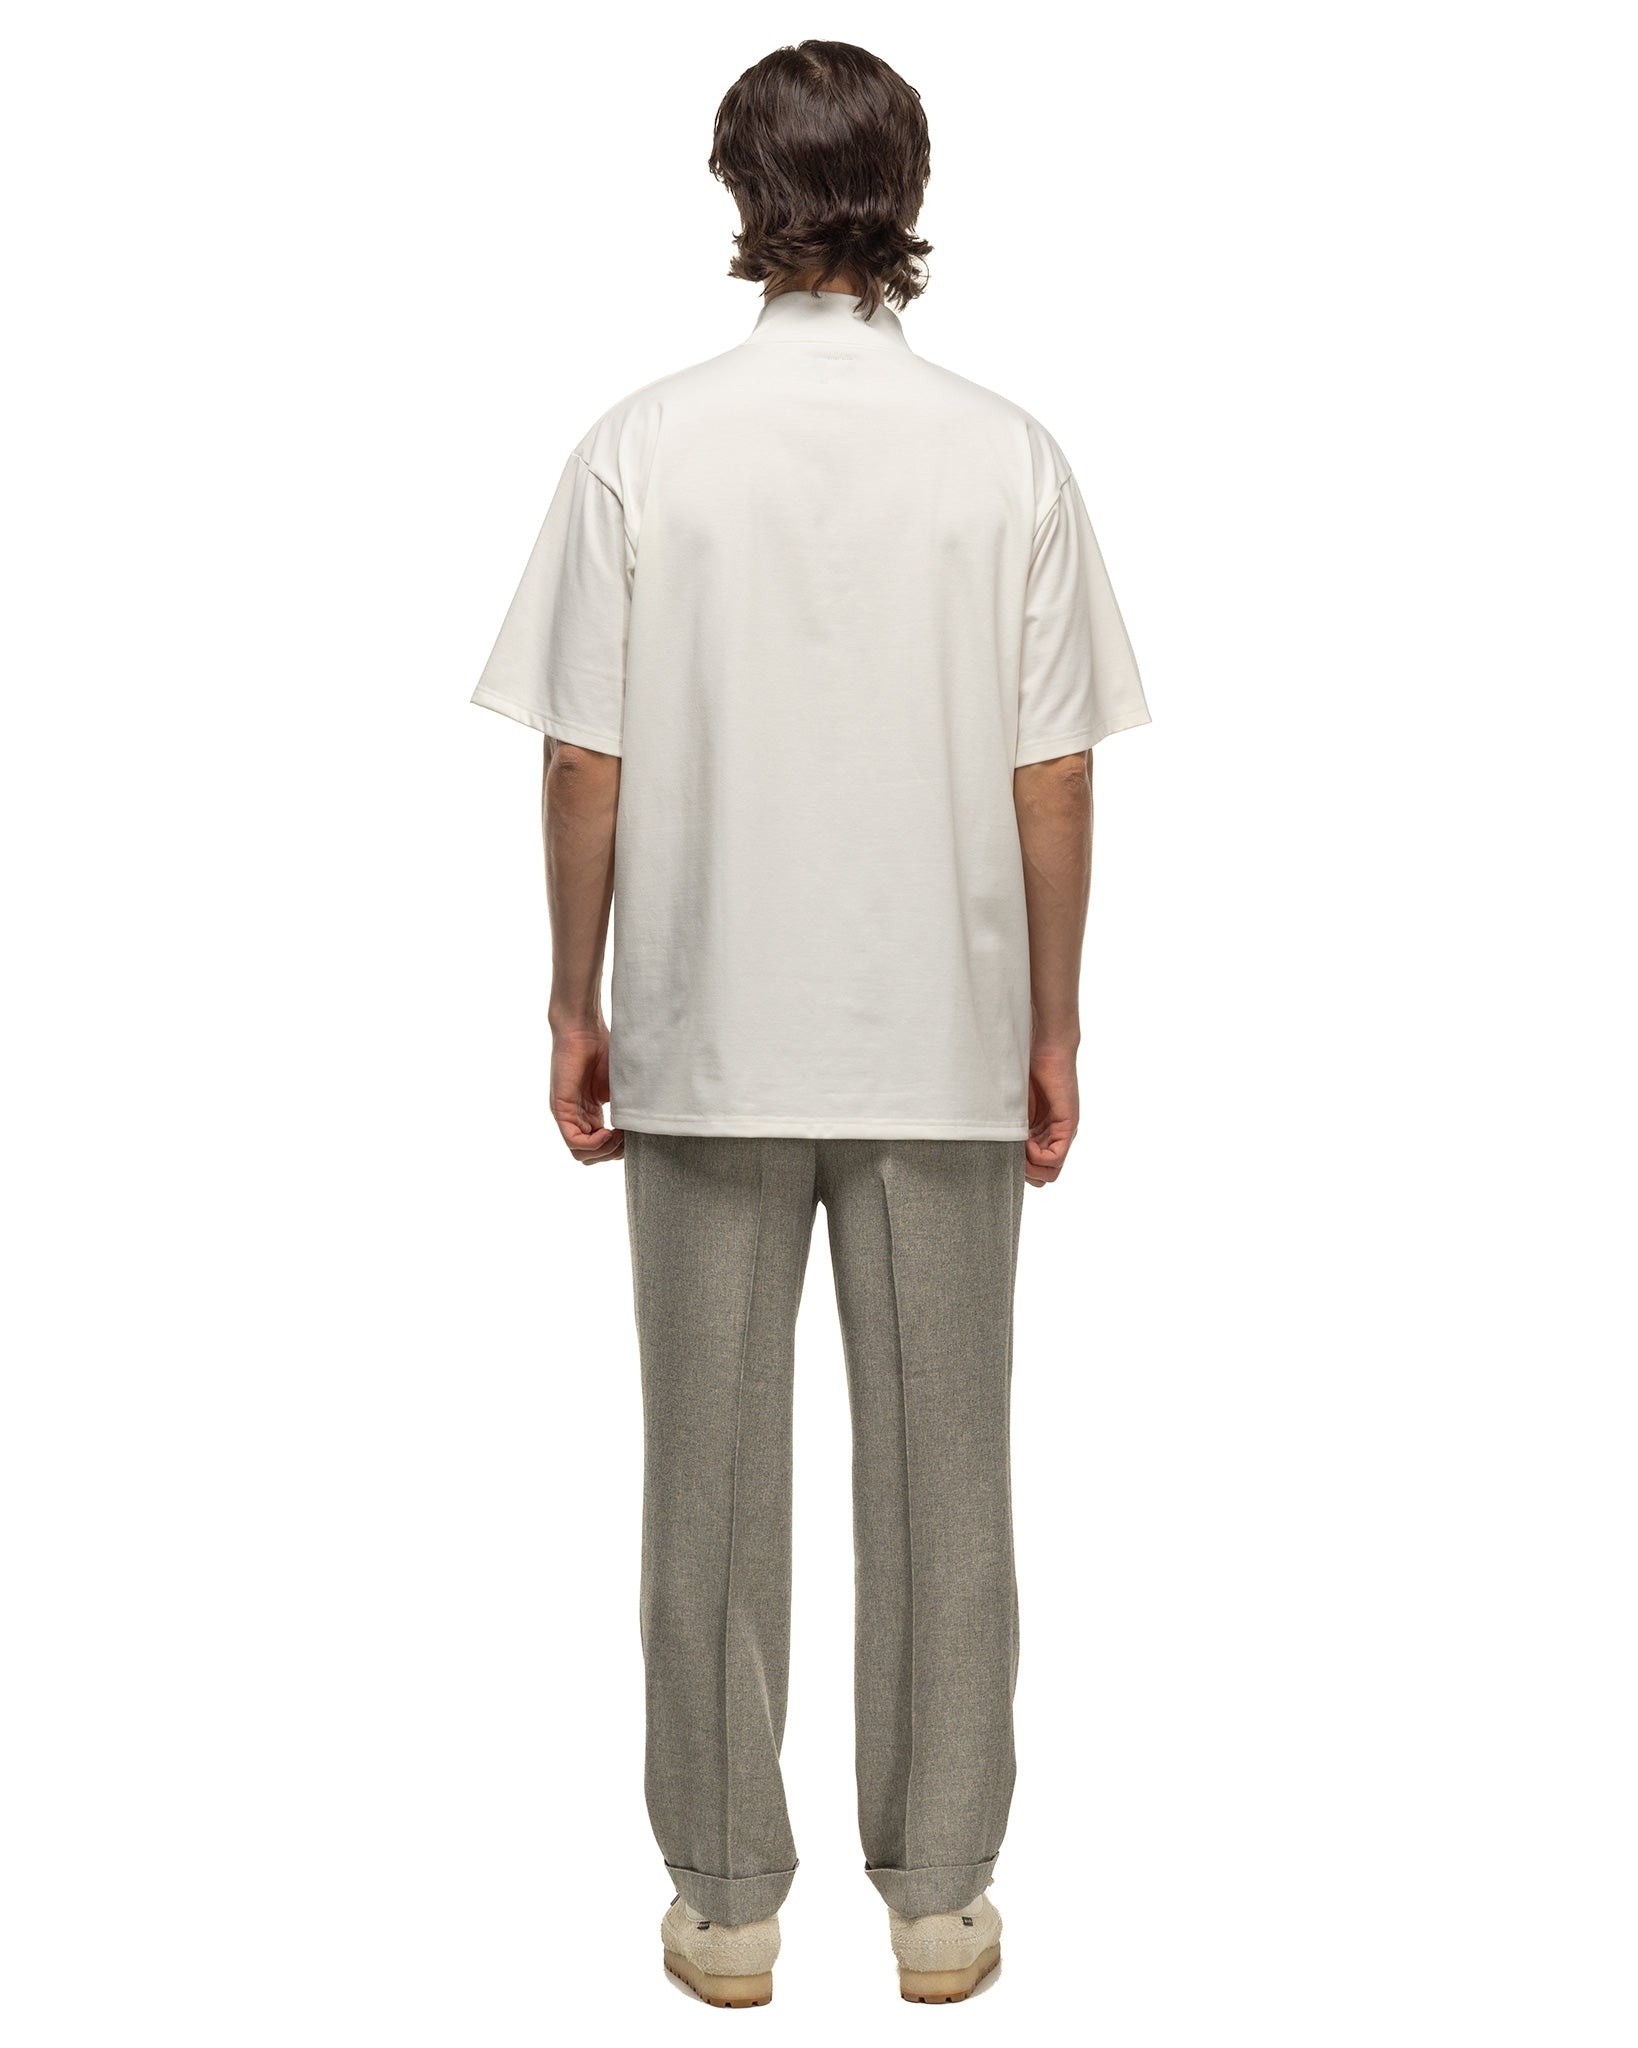 S/S Mock Neck Tee - Poly Jersey White - 3